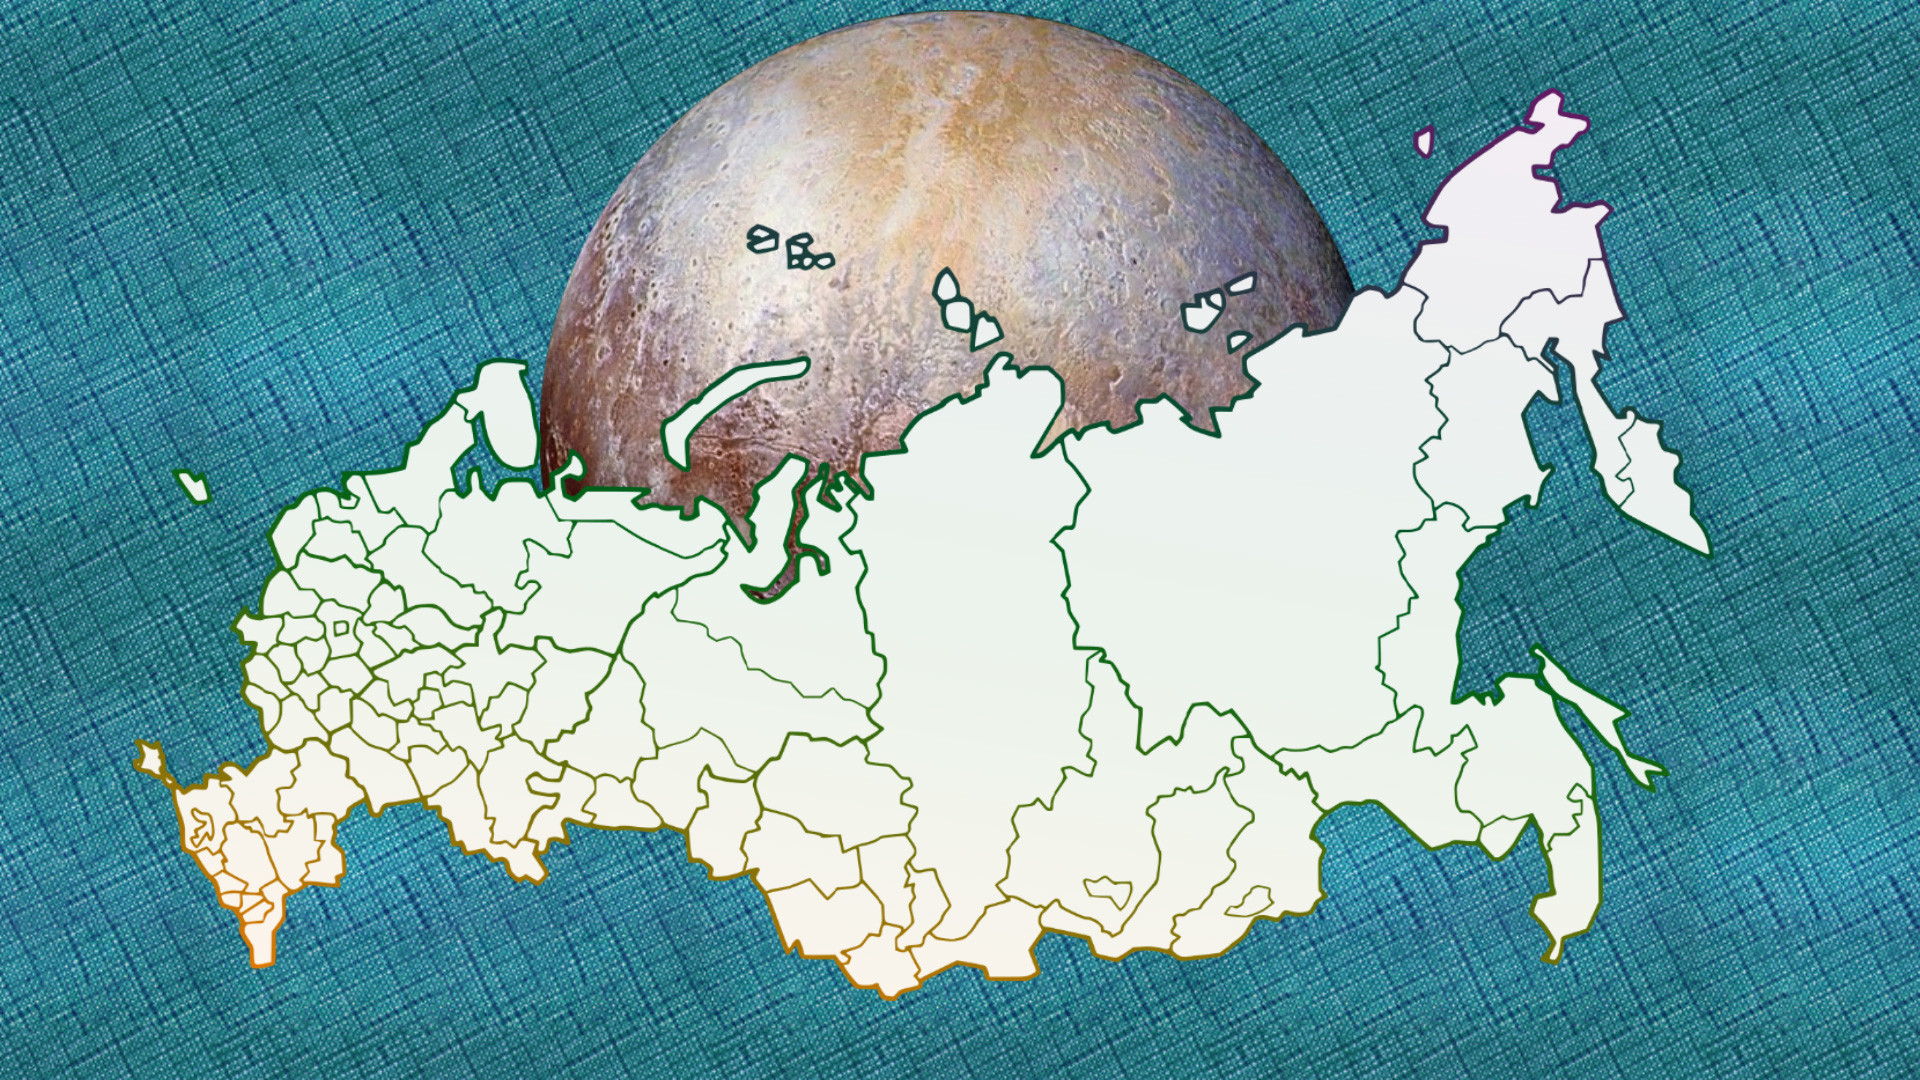 Is Russia bigger than Pluto